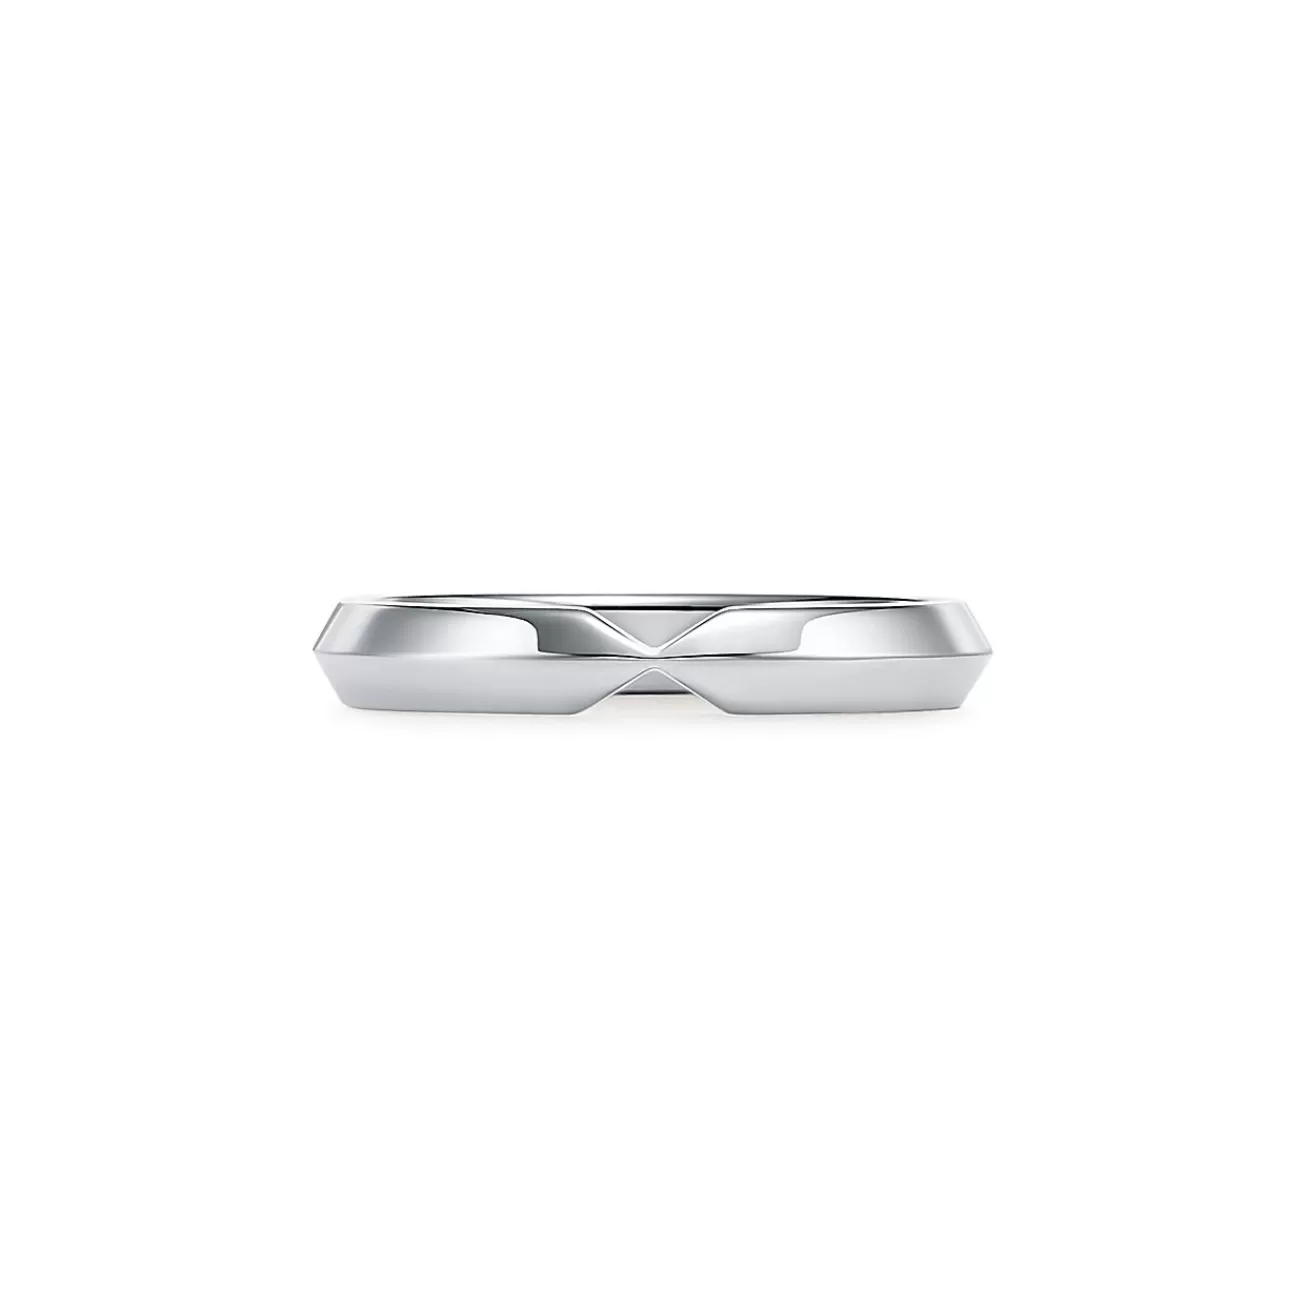 Tiffany & Co. The Tiffany® Setting nesting narrow band ring in platinum, 3 mm wide. | ^Women Rings | Stacking Rings